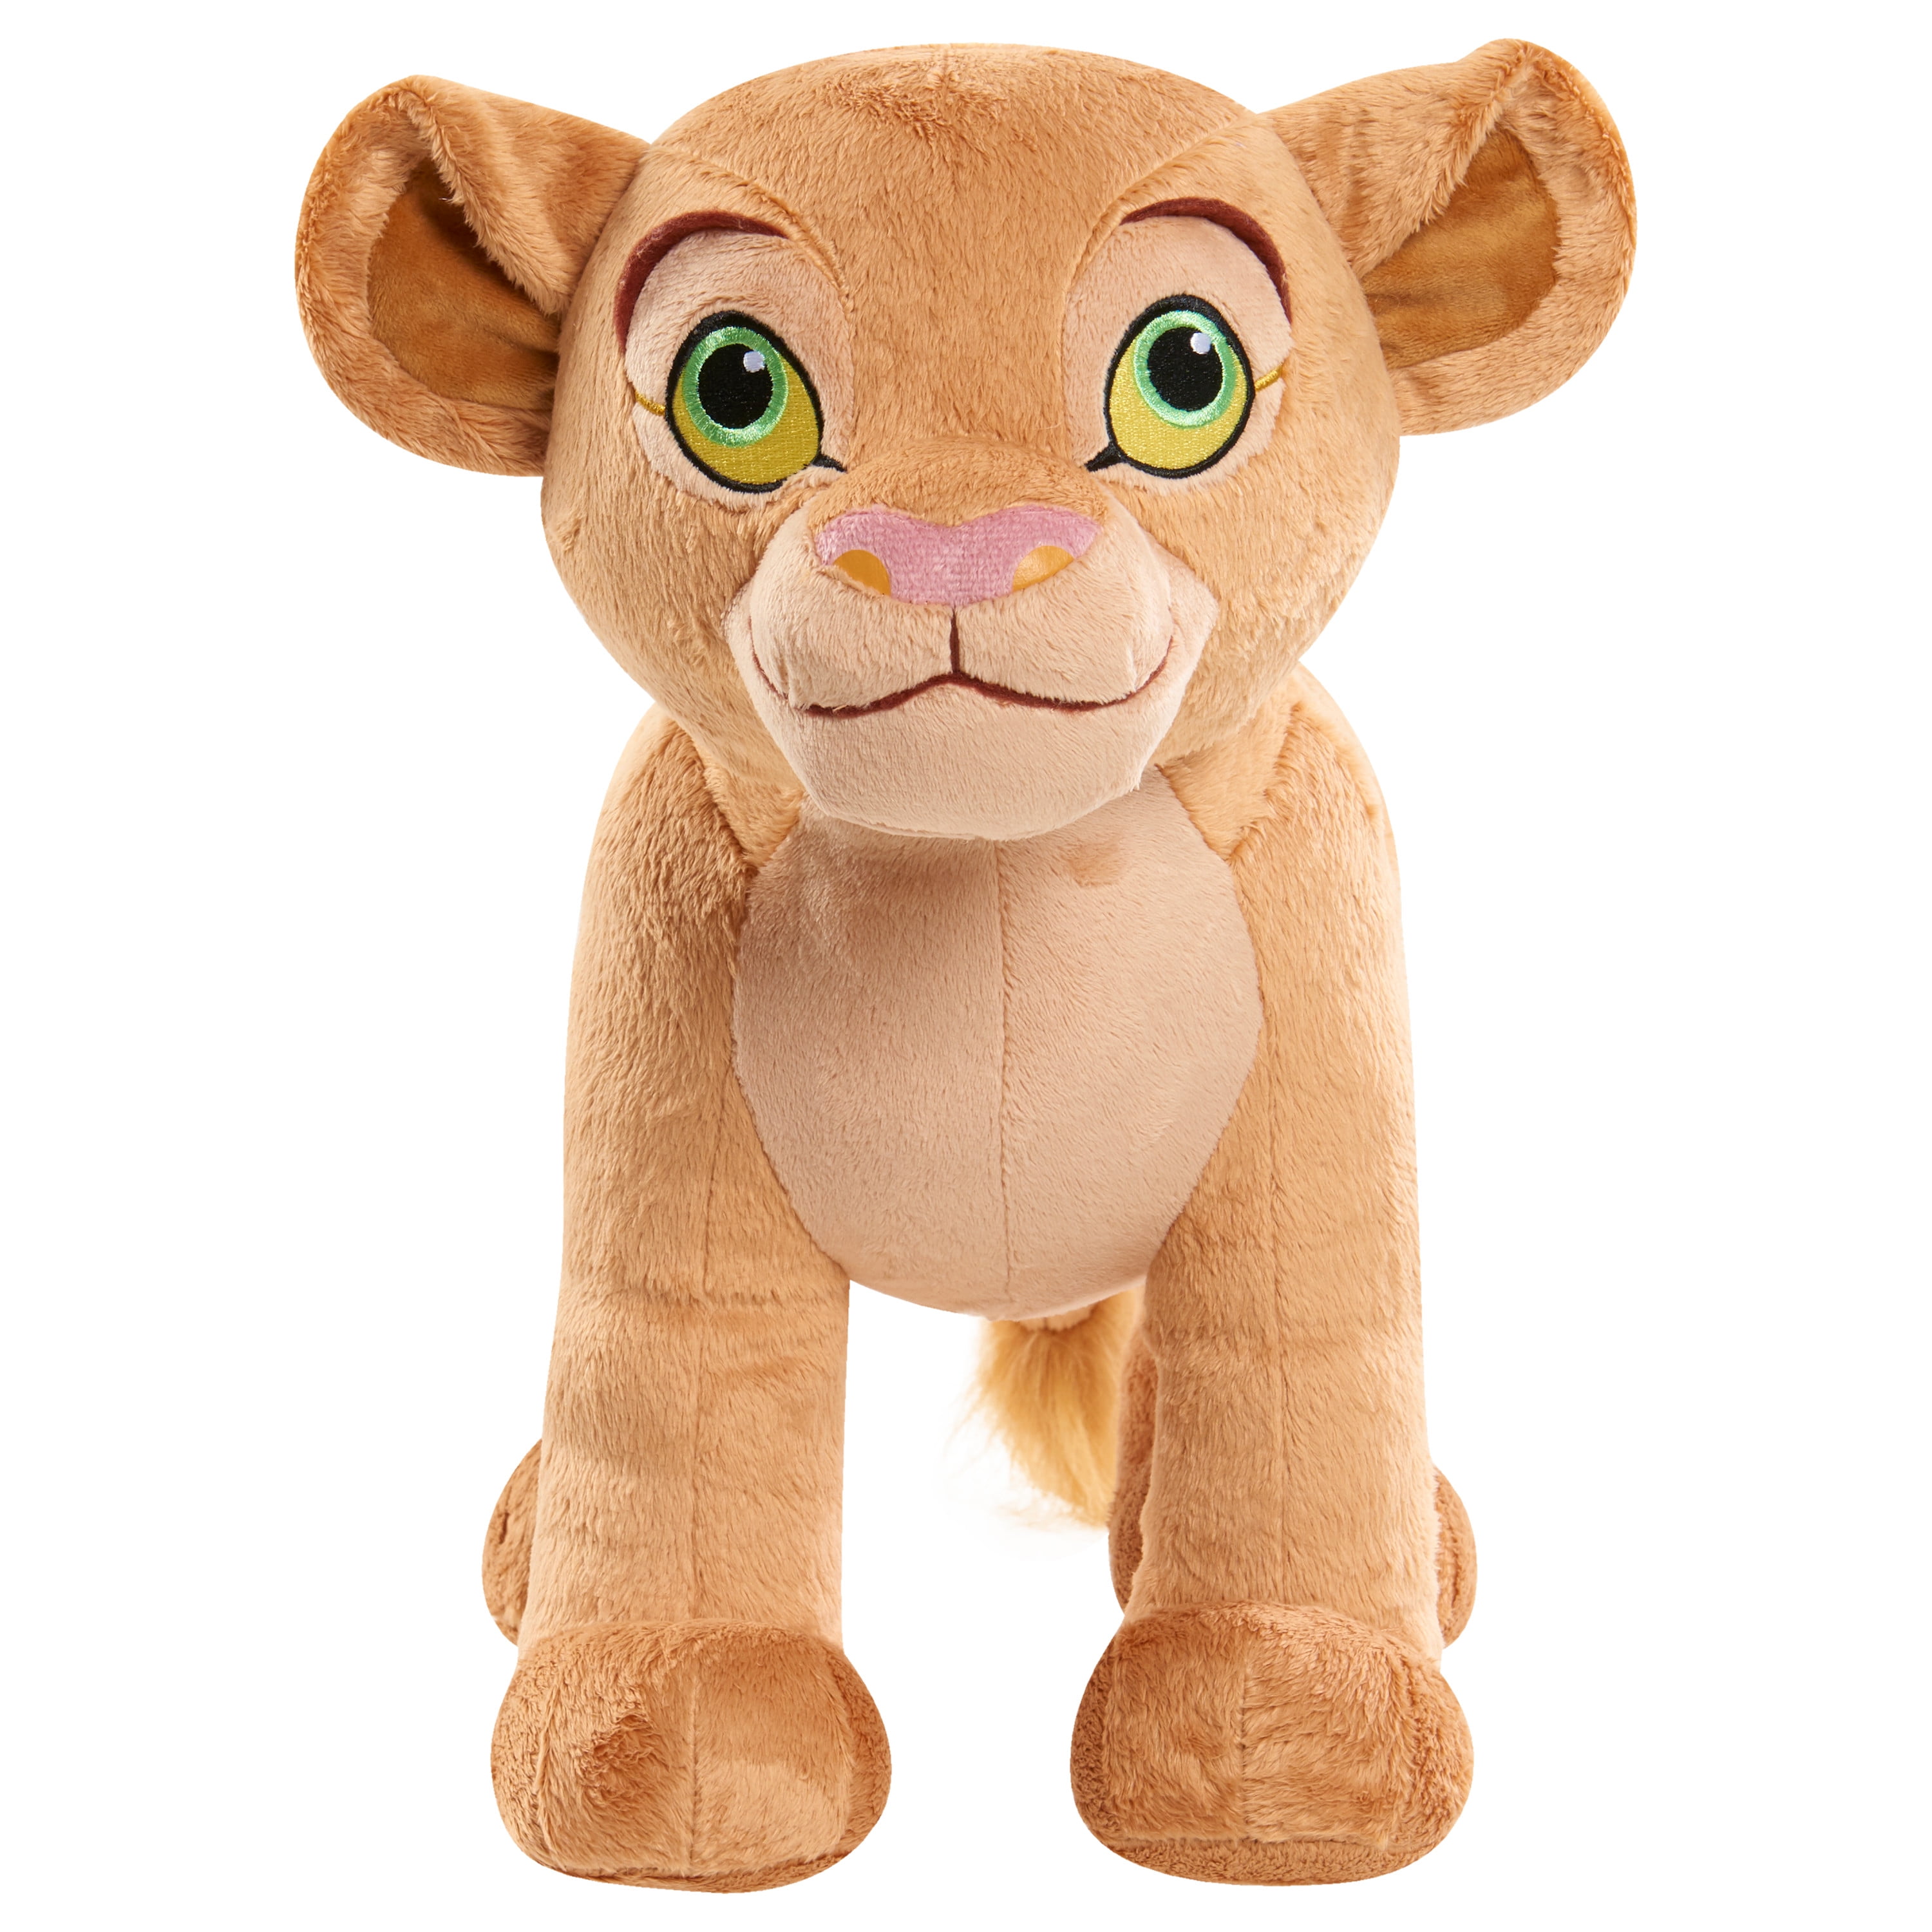 2019 Disney's The Lion King Nala Plush Toy by Just Play 7" 